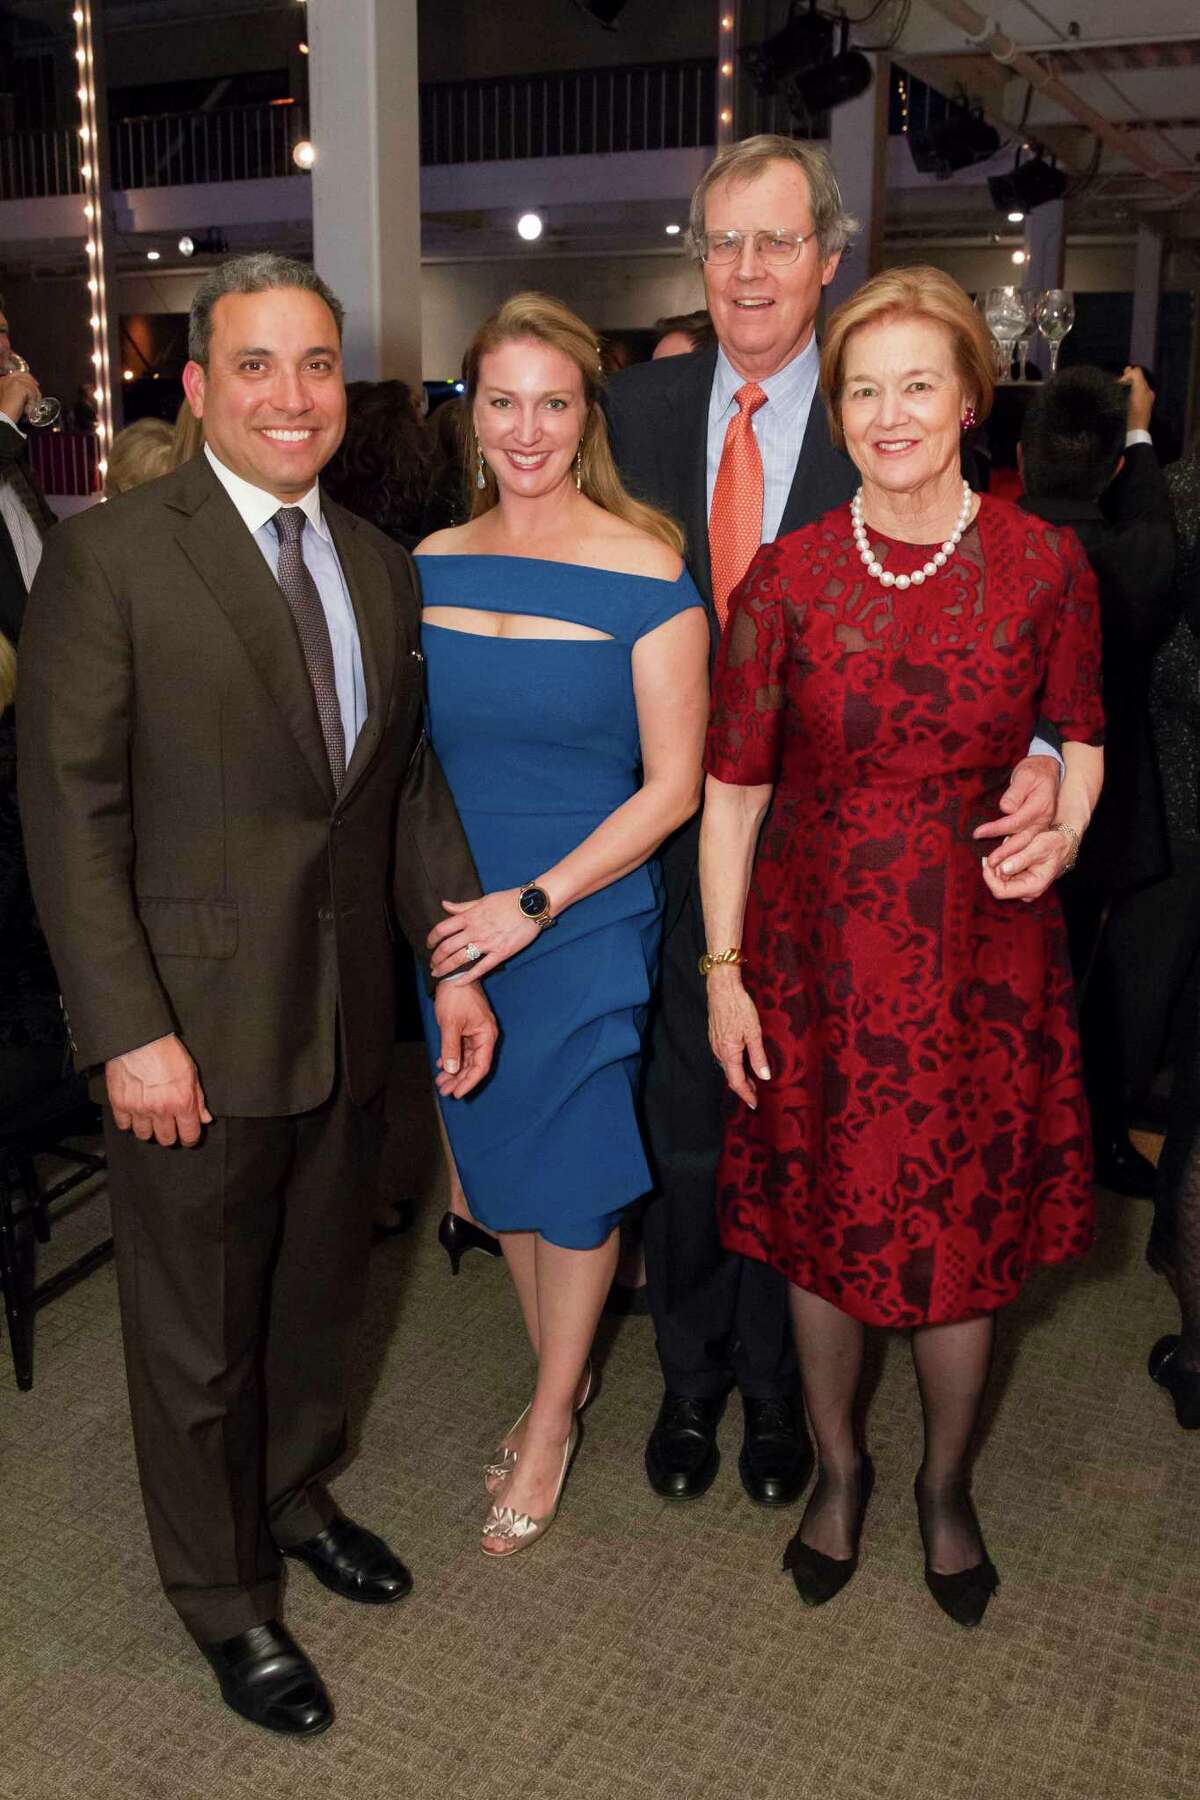 Nick Koukopoulos, Lucy Hume Koukopoulos, George Hume, and Leslie Hume at the Smuin Ballet Gala.